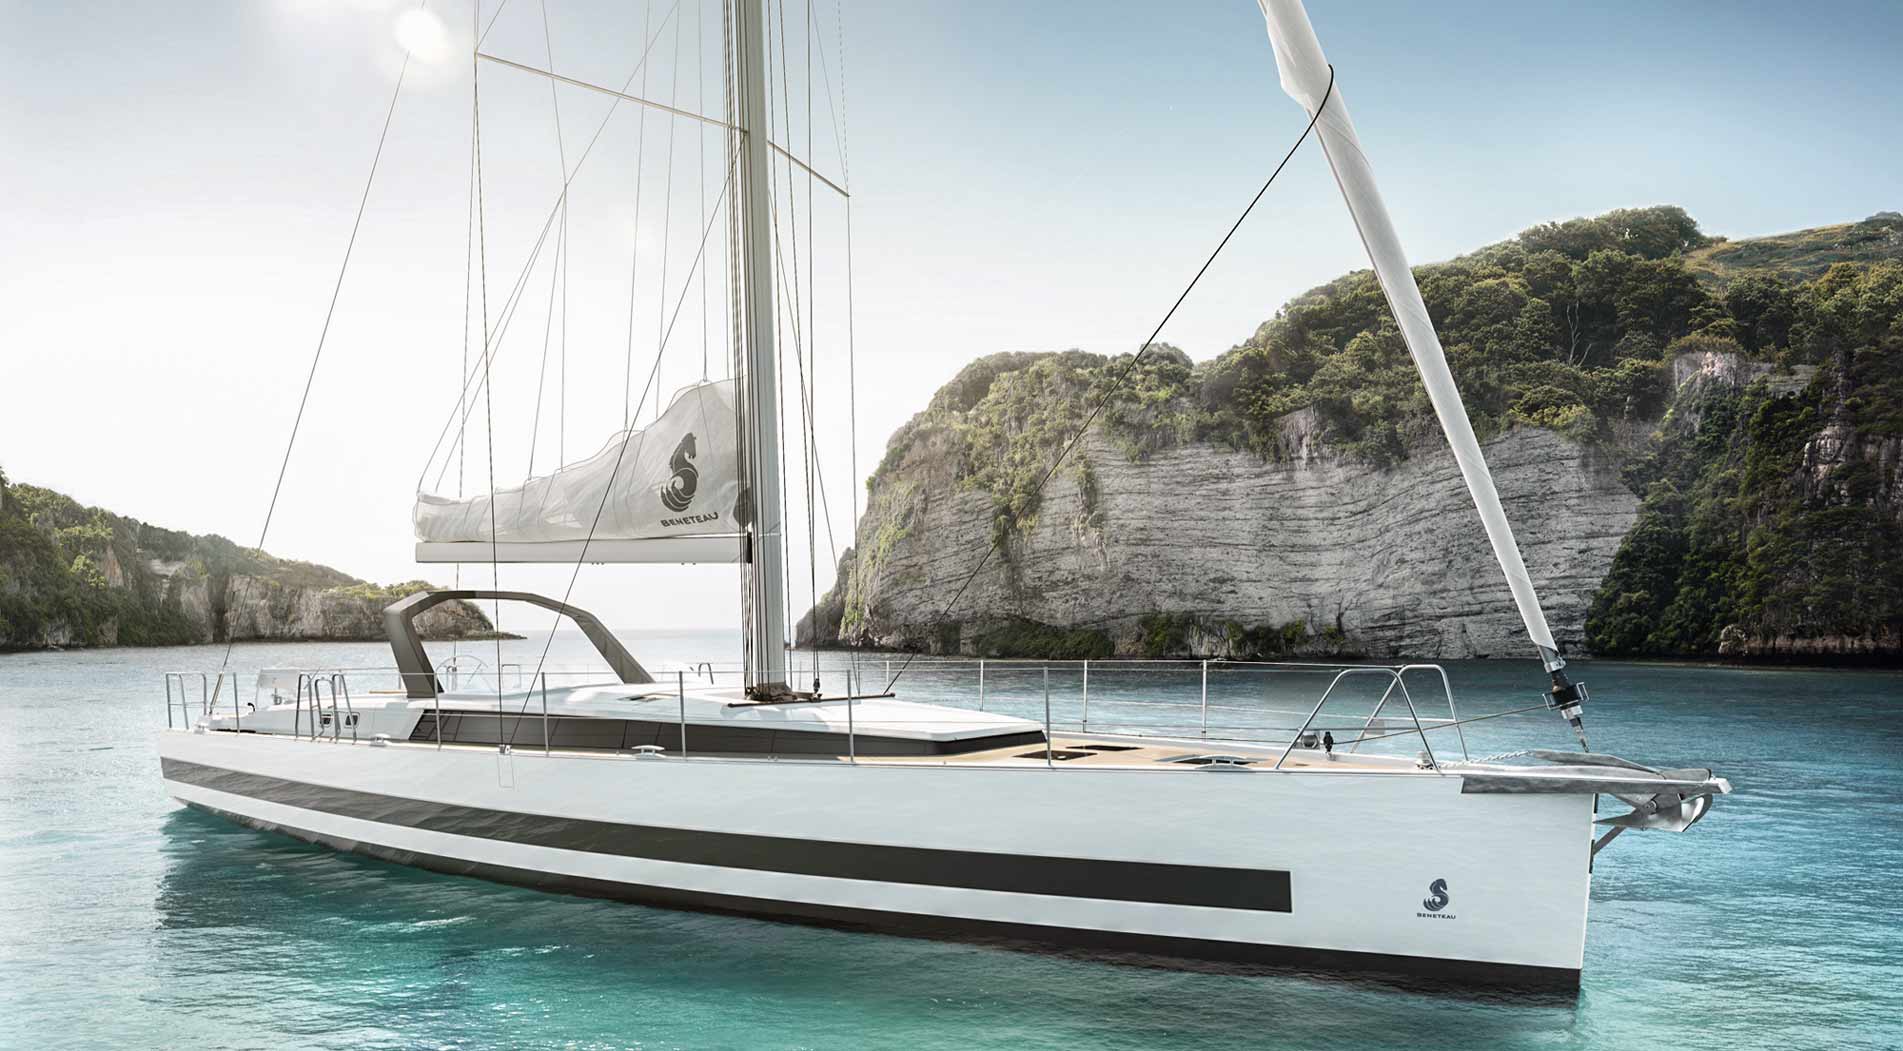 The new Oceanis Yacht class from Beneteau - This is the first boat to be launched in the new class of luxury yachts from Beneteau